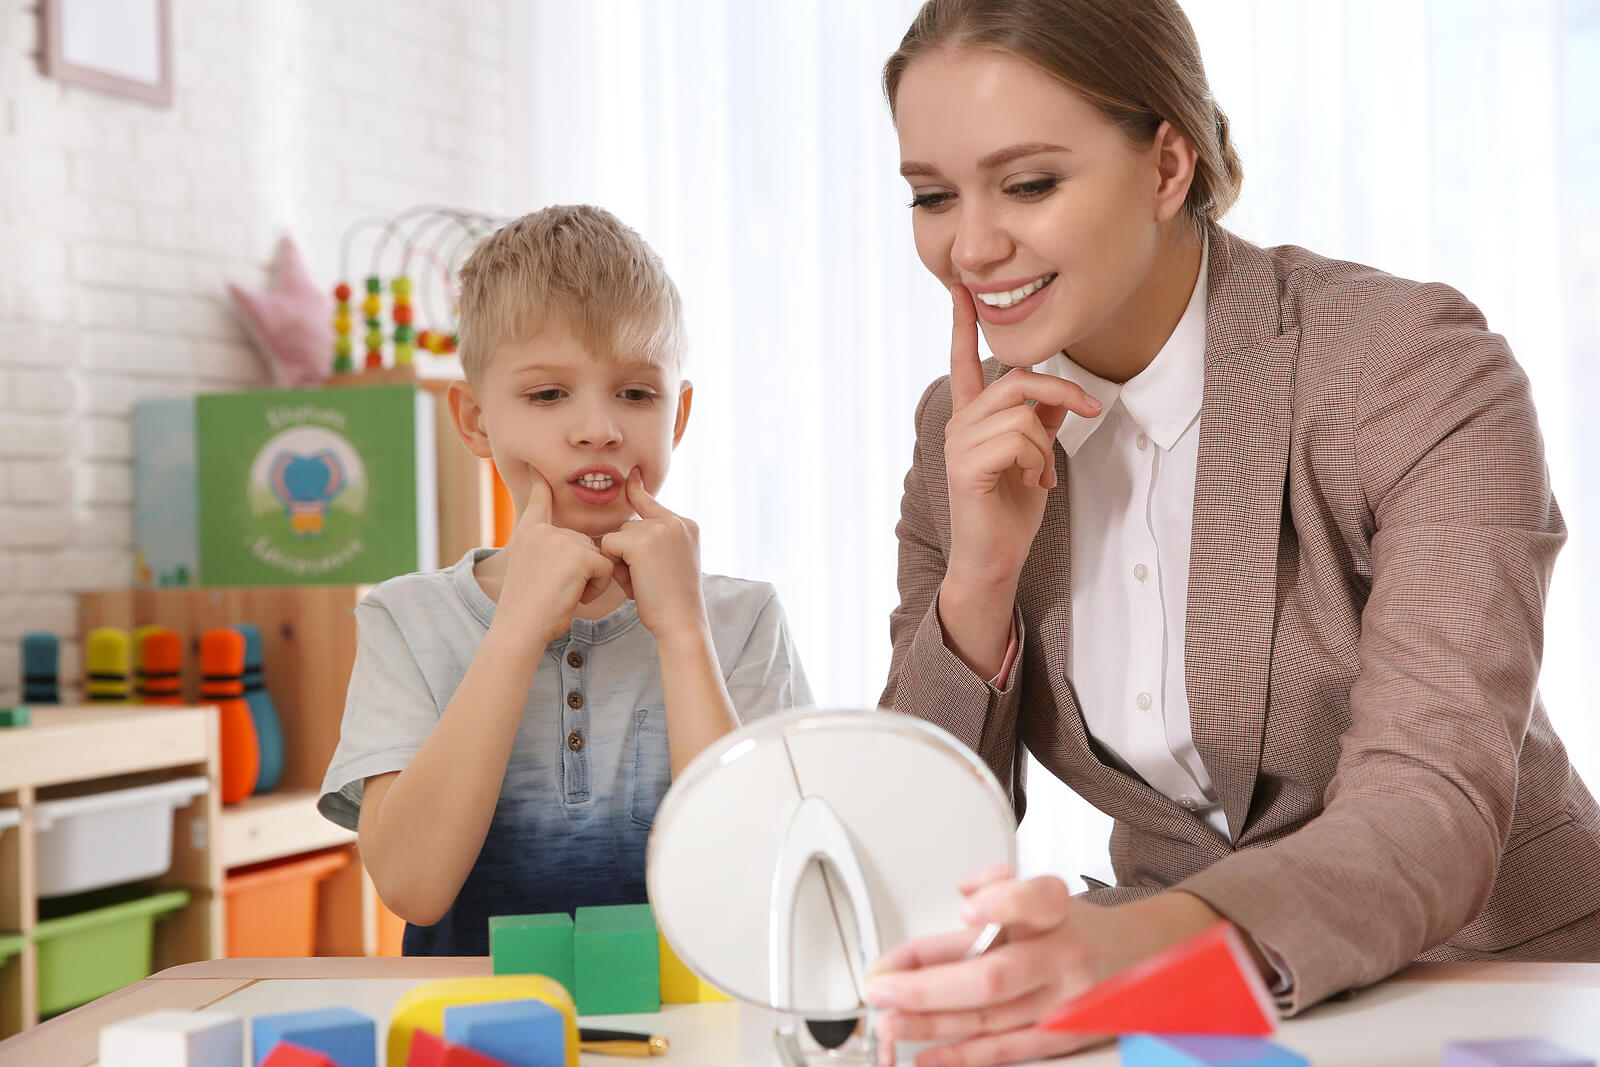 A speech therapist working with a child.